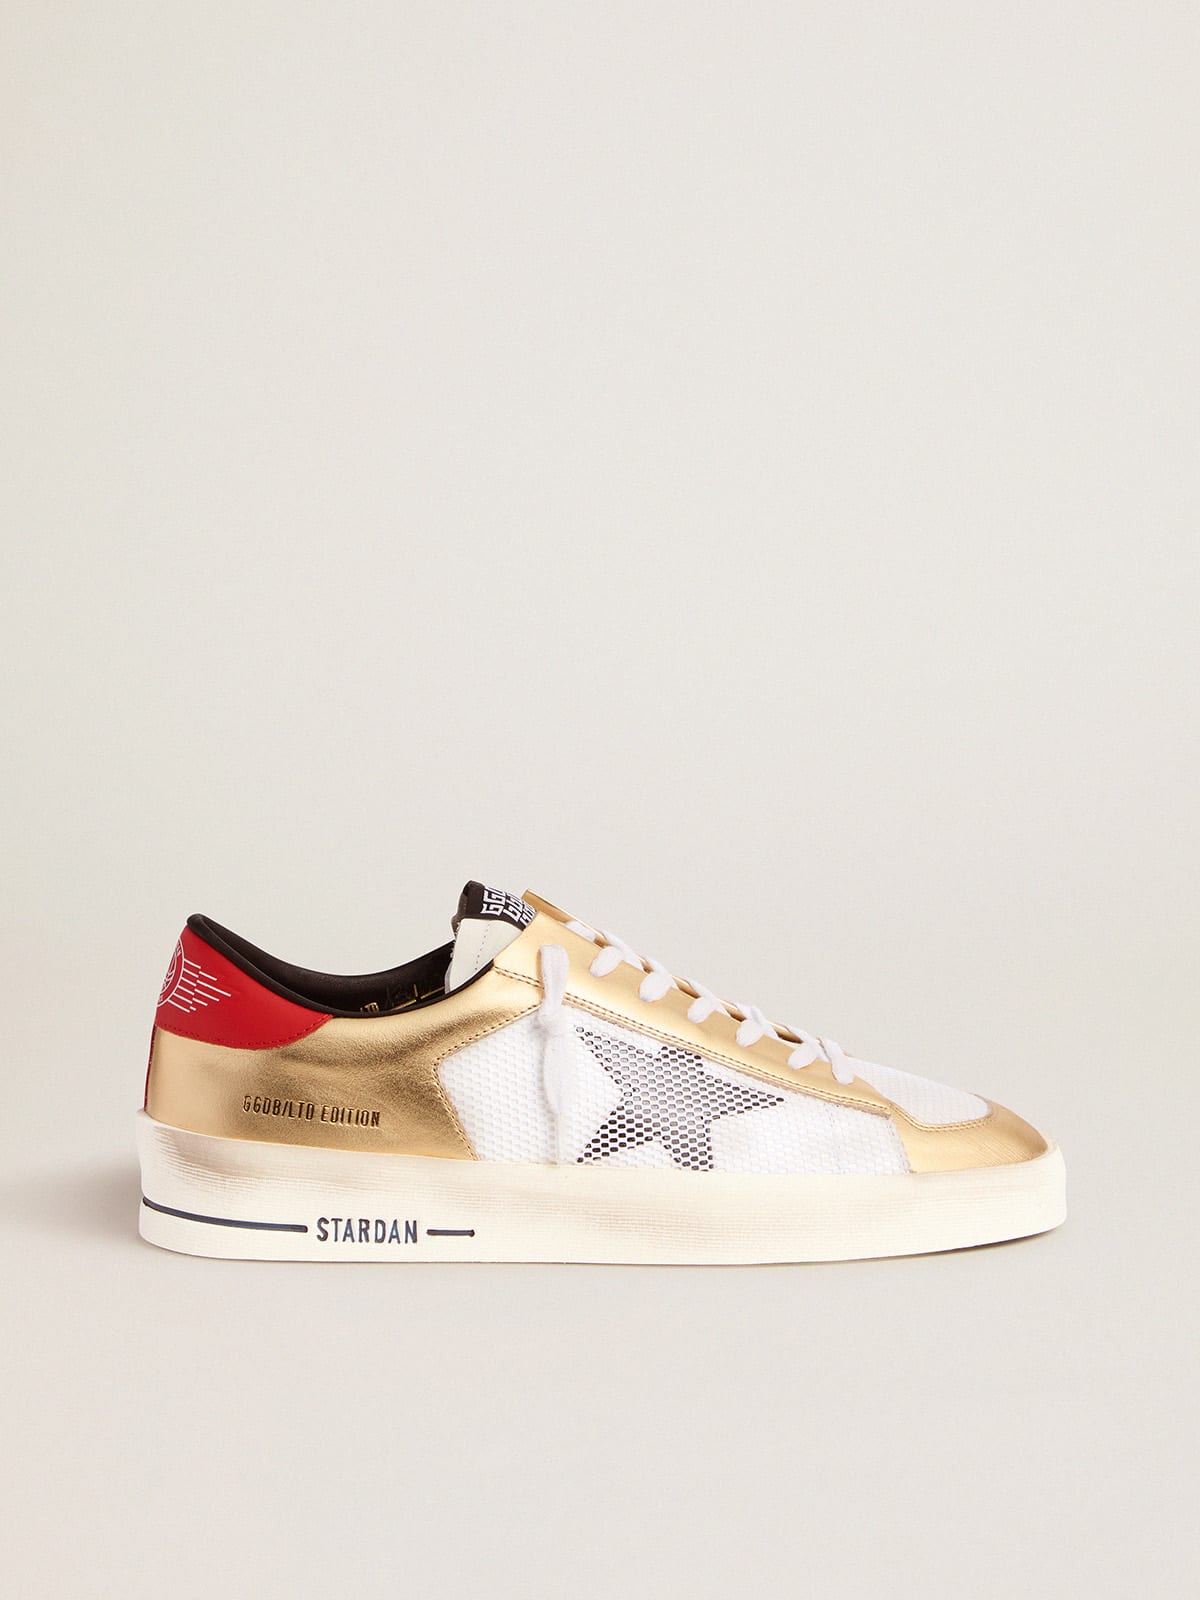 Women\'s Limited Edition Stardan sneakers with gold inserts | Golden Goose